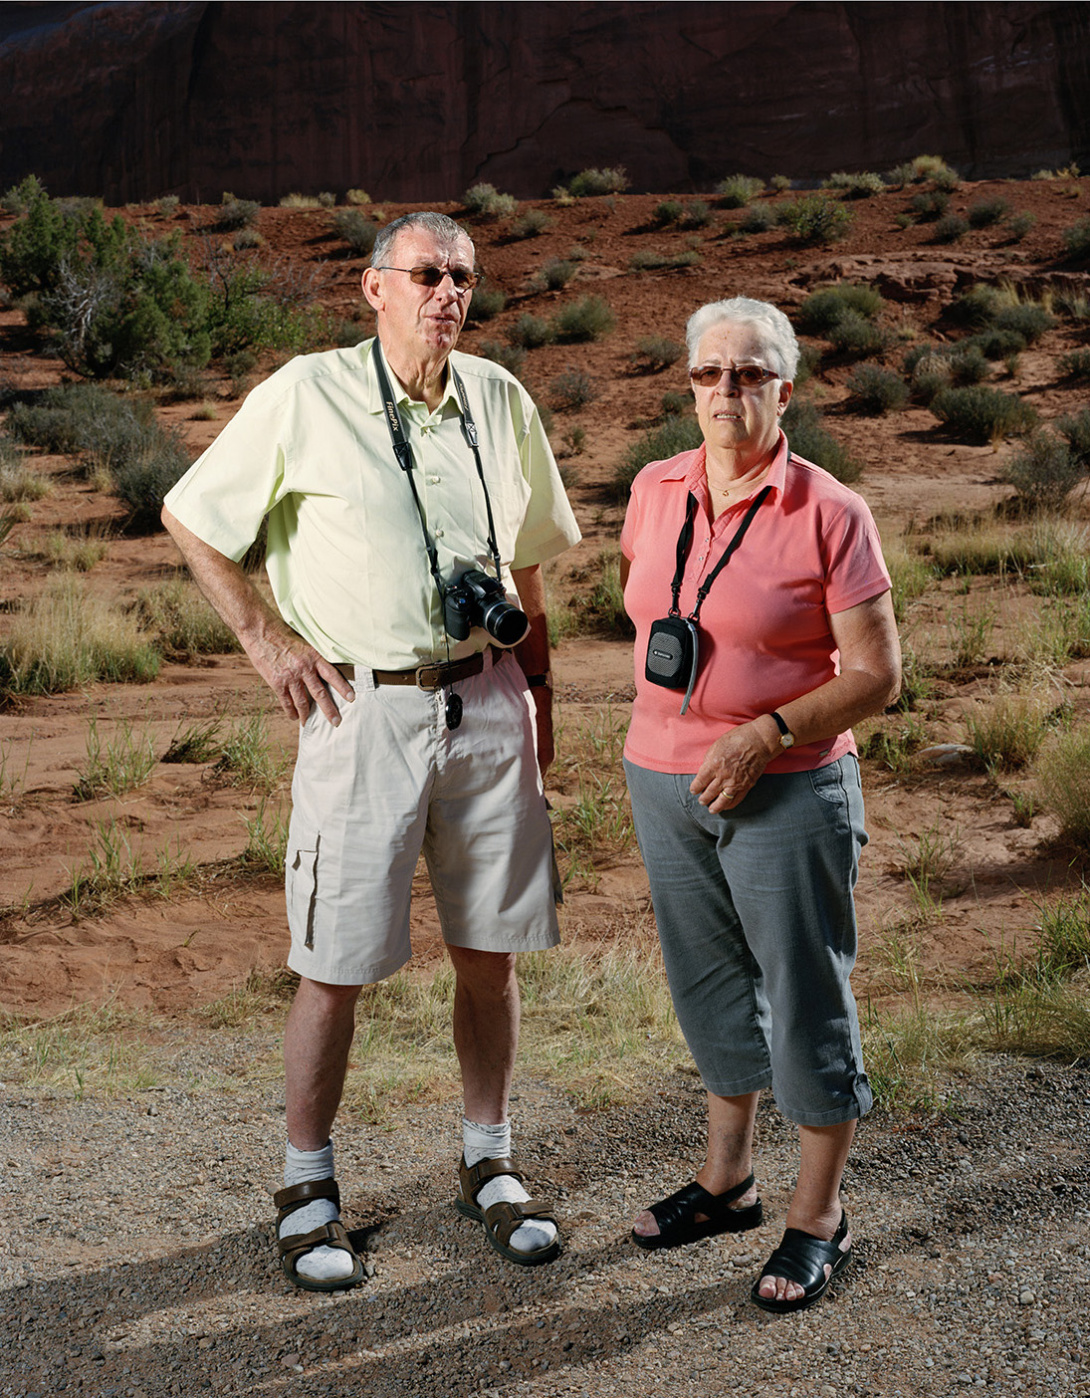 An older man and woman who are dressed for the heat—wearing sunglasses, short sleeved shirts, and sandals.—pose for a photograph at dusk. Each have a camera around their necks. They are in front of canyon with red dirt, rocks, and green vegetation.